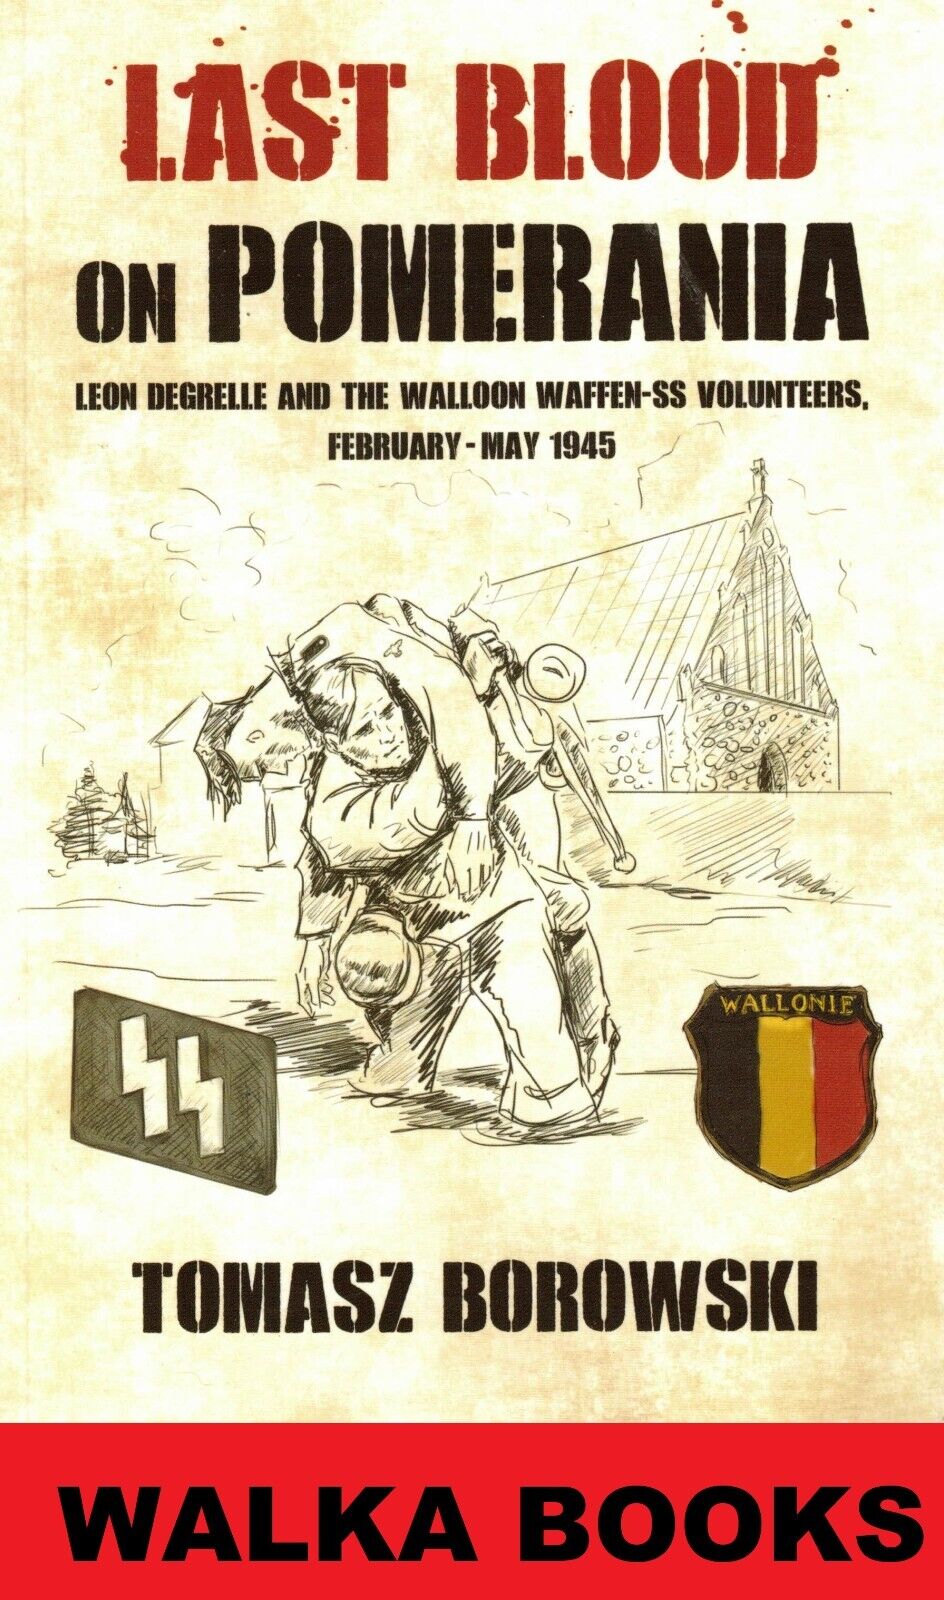 Last Blood on Pomerania: Leon Degrelle and the Walloon Waffen SS Volunteers NEW